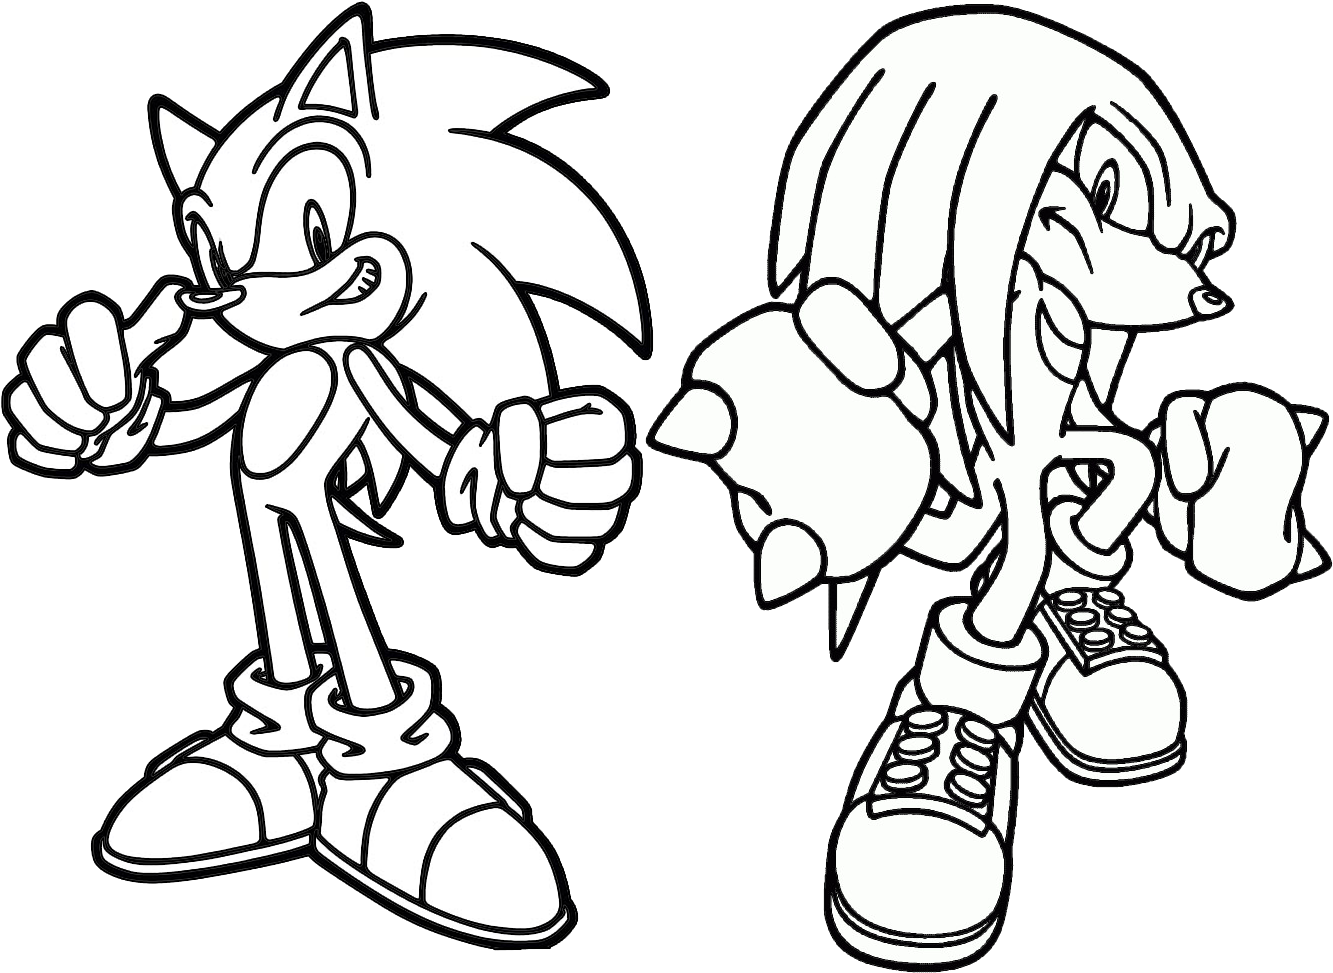 sonic and knuckles coloring pages